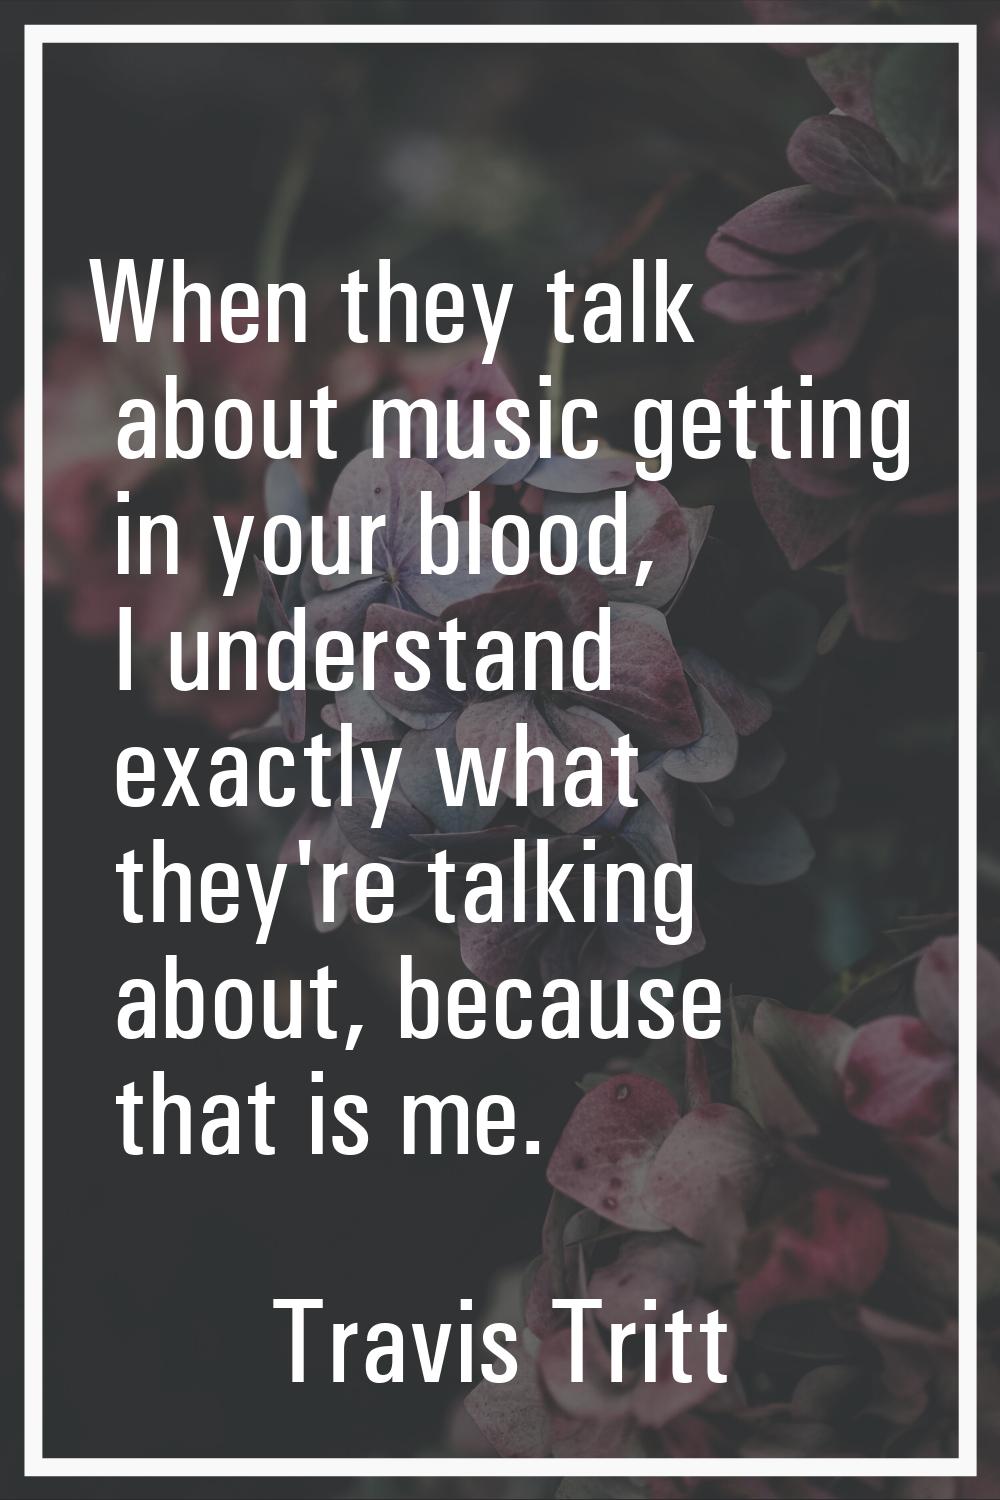 When they talk about music getting in your blood, I understand exactly what they're talking about, 